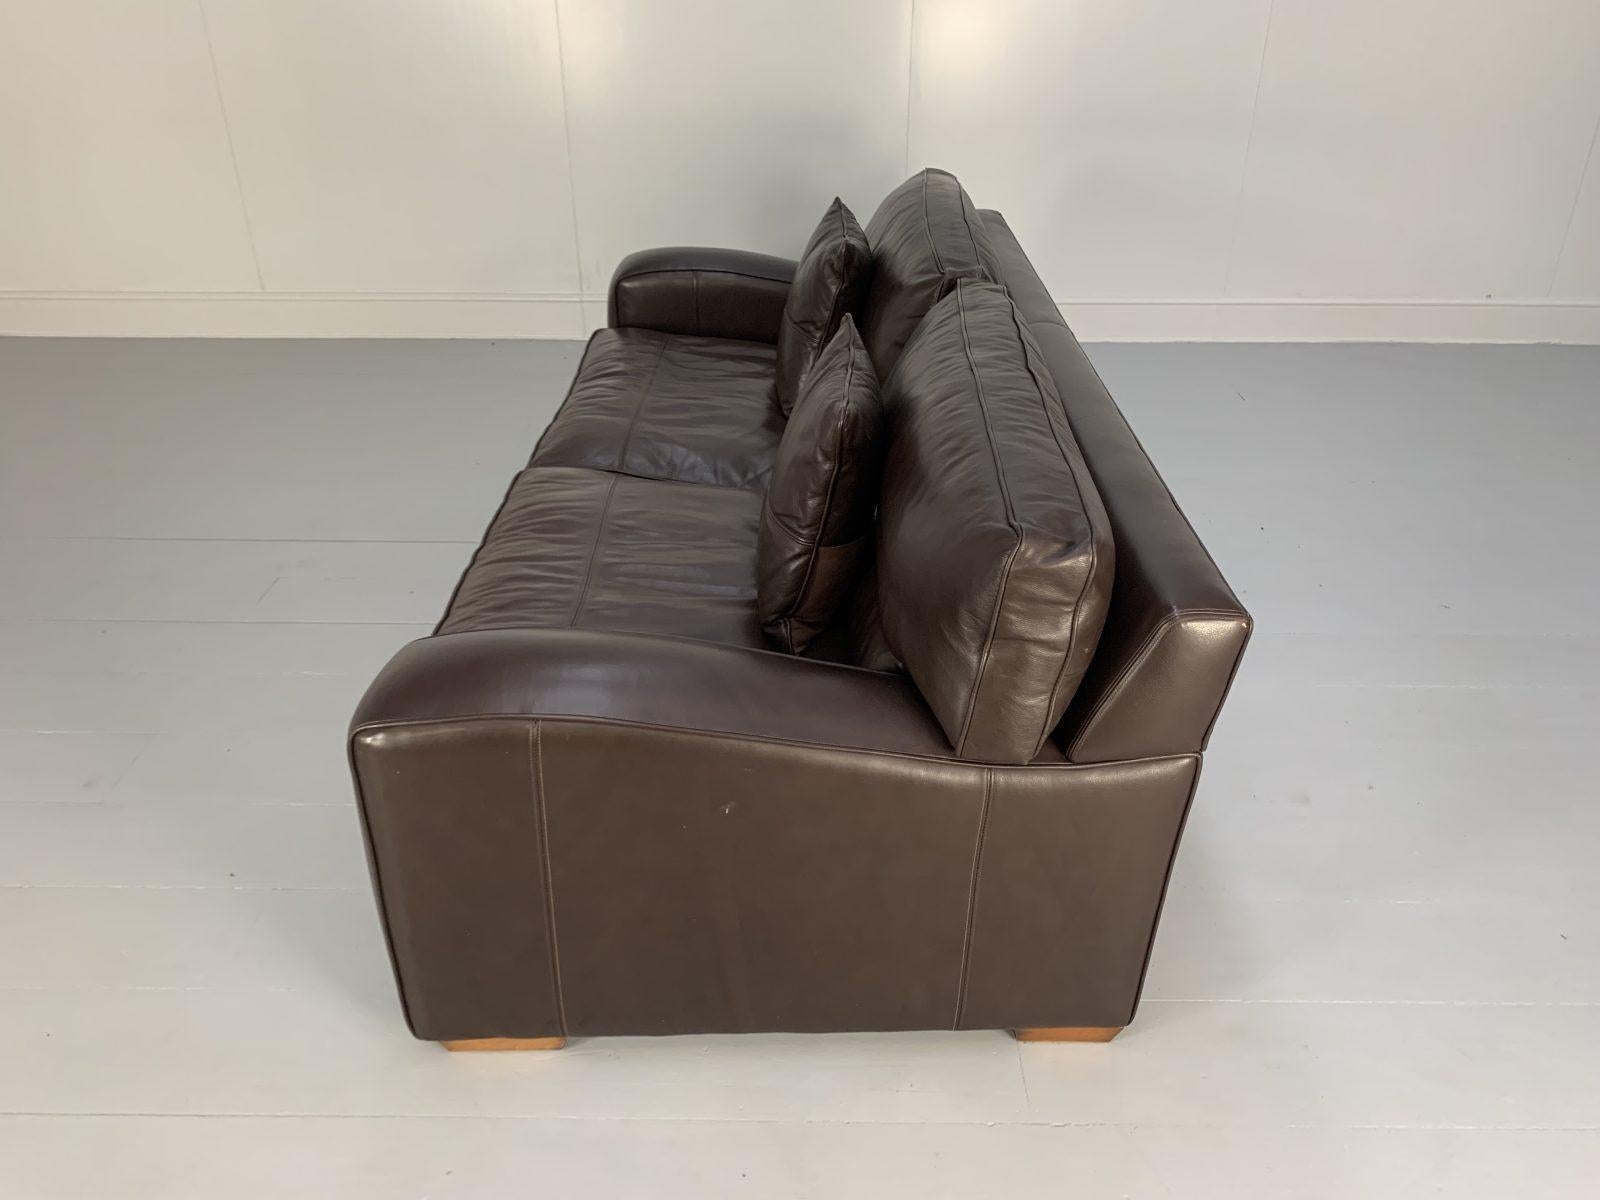 Duresta “Panther” Grand 3-Seat Sofa, in Dark Brown Leather For Sale 2